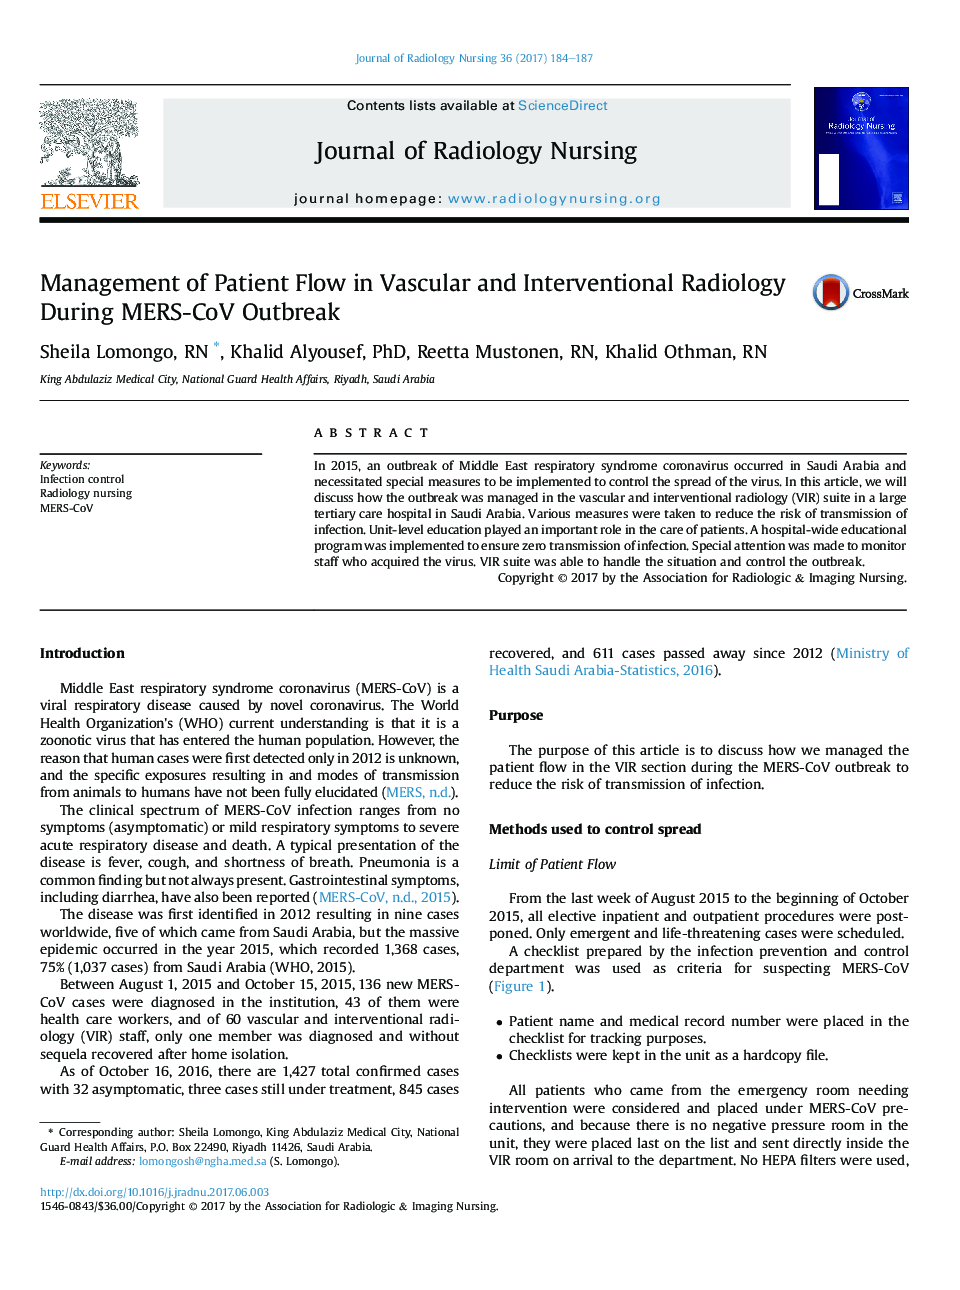 Management of Patient Flow in Vascular and Interventional Radiology During MERS-CoV Outbreak